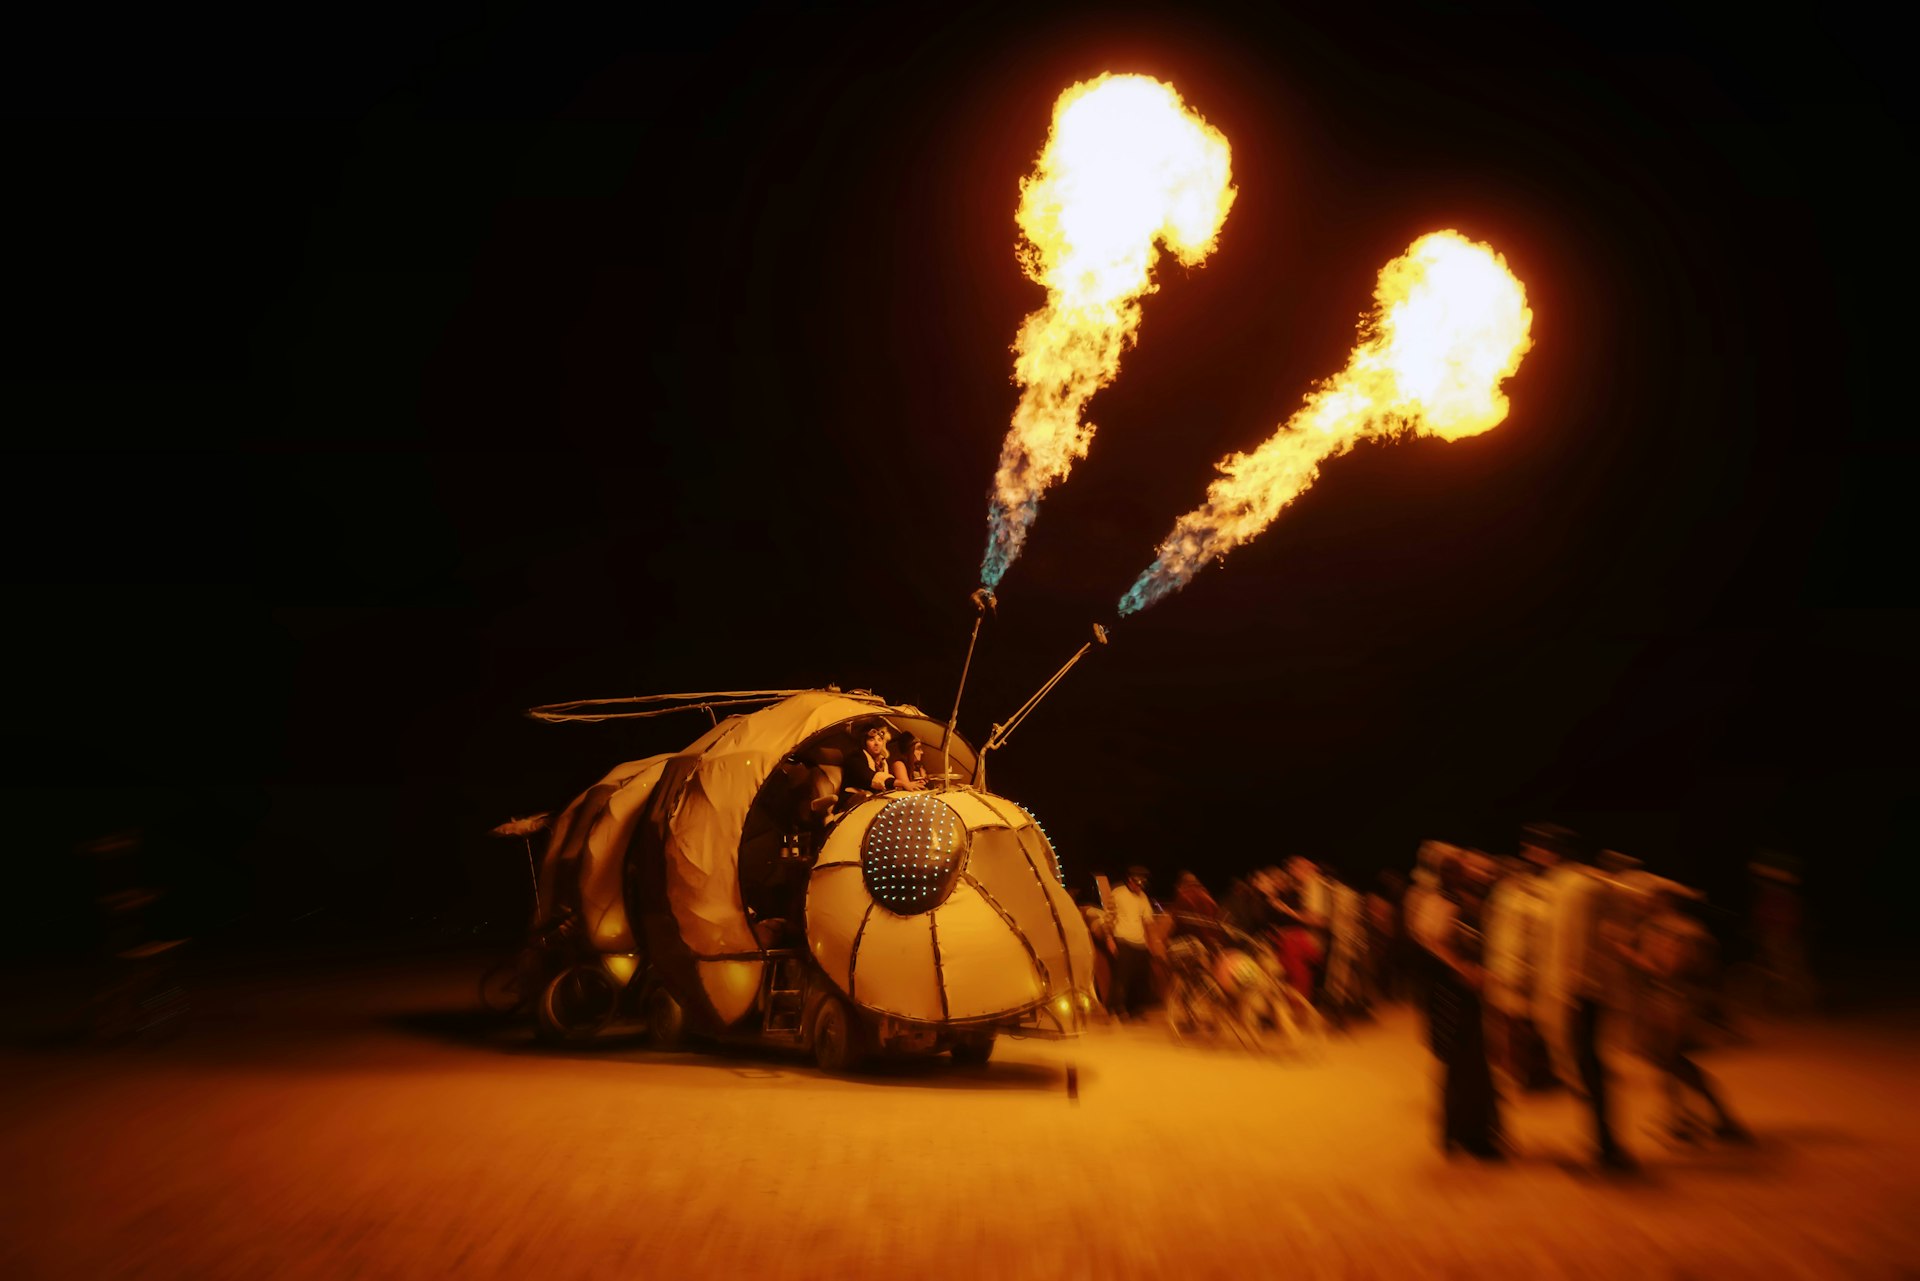 Flames shooting from a mutant vehicle at Burning Man 